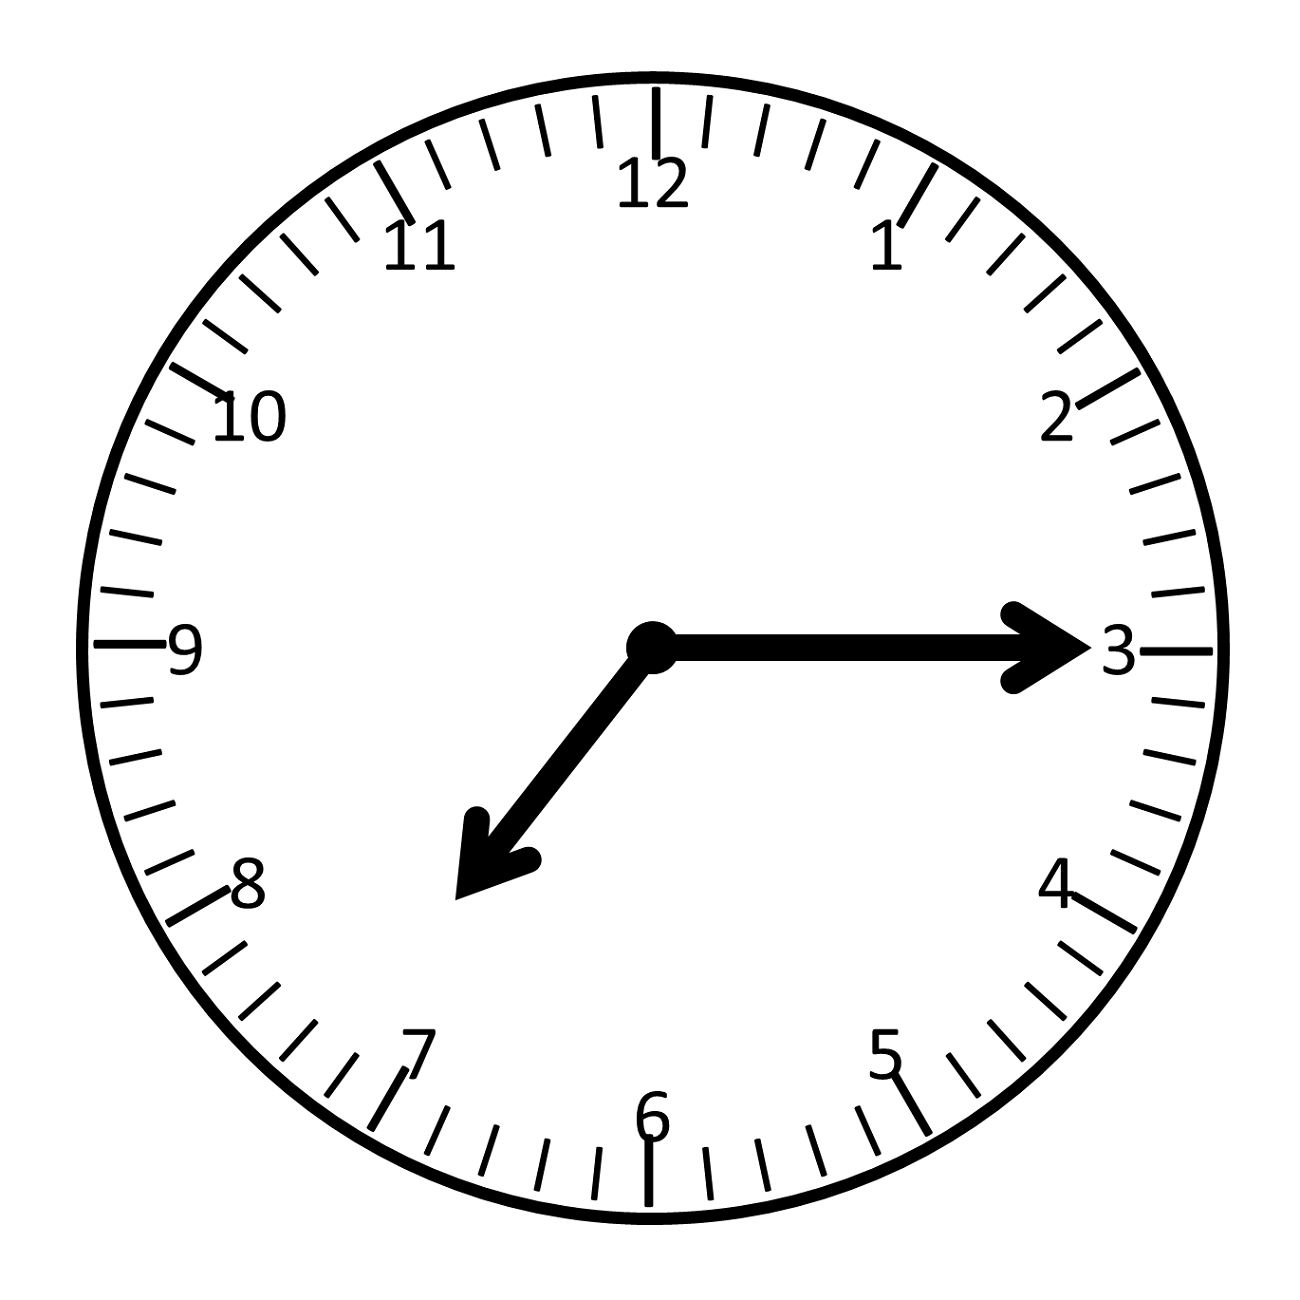 Printable Analog Clock Face With Hands